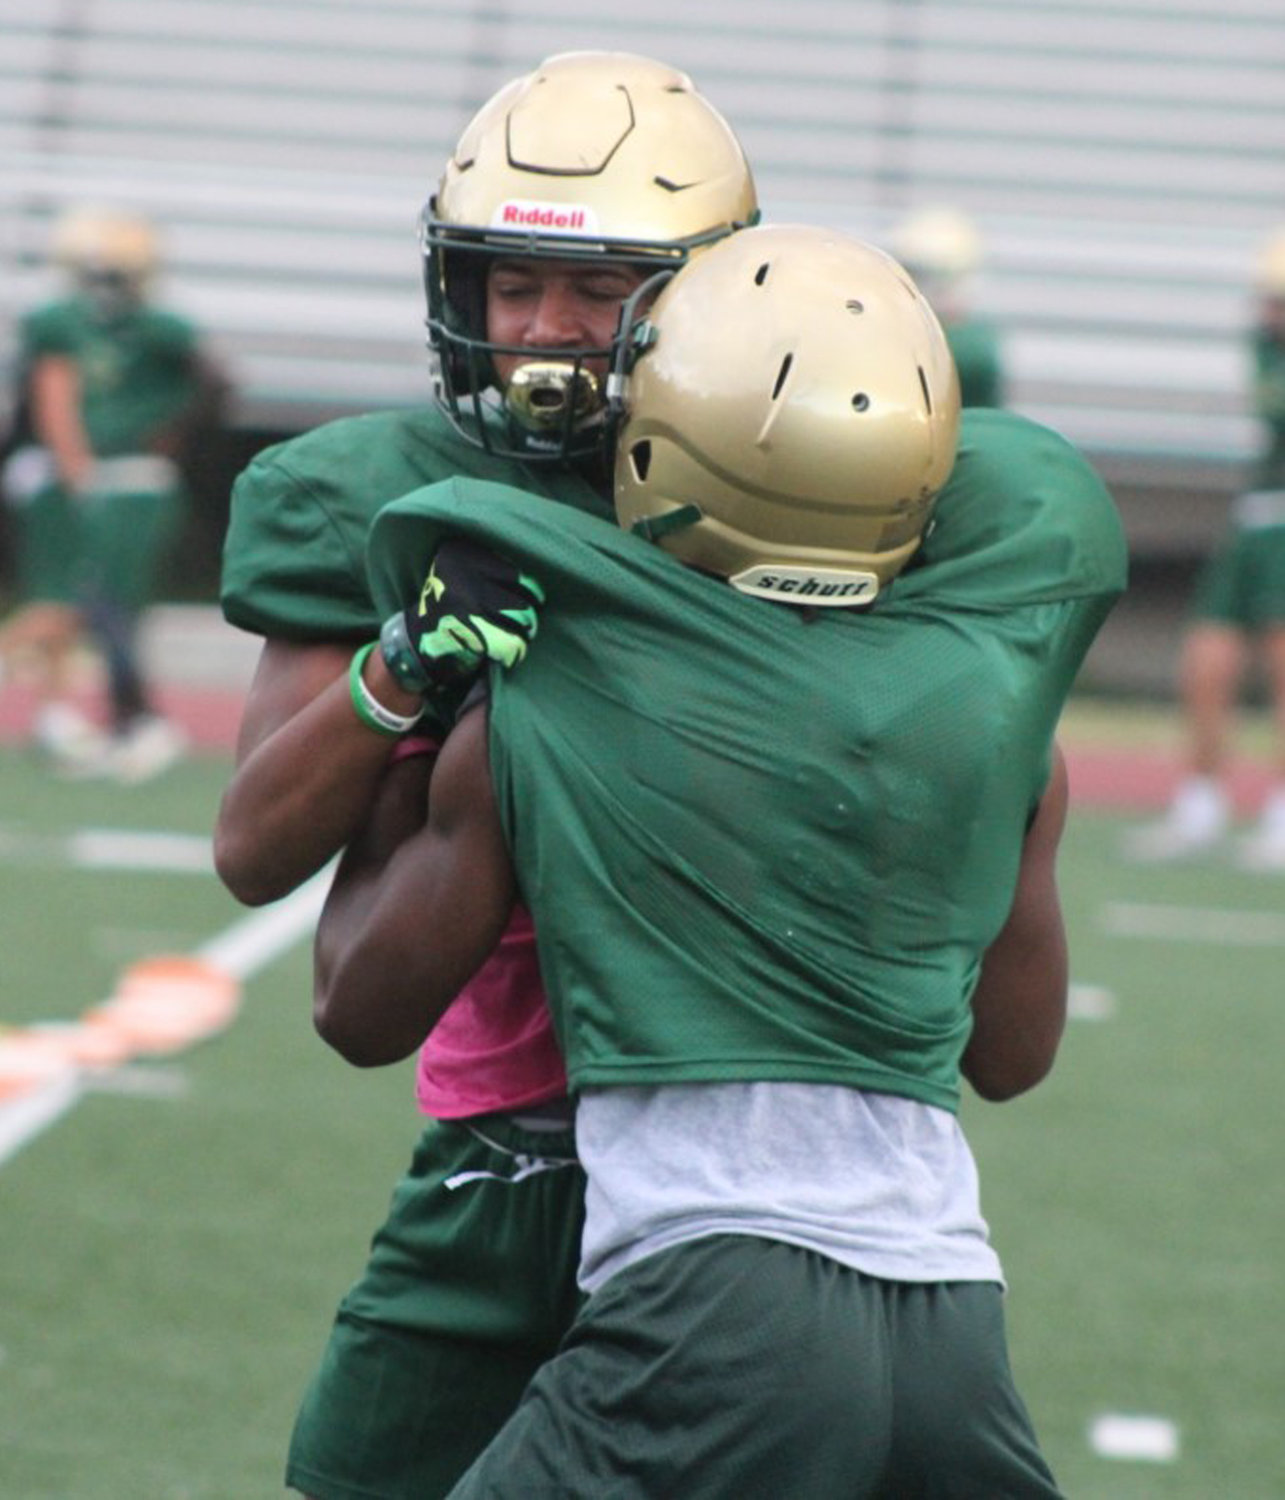 BACK IN CAMP: Hendricken players engage in blocking drills at practice. (Photos by Alex Sponseller)